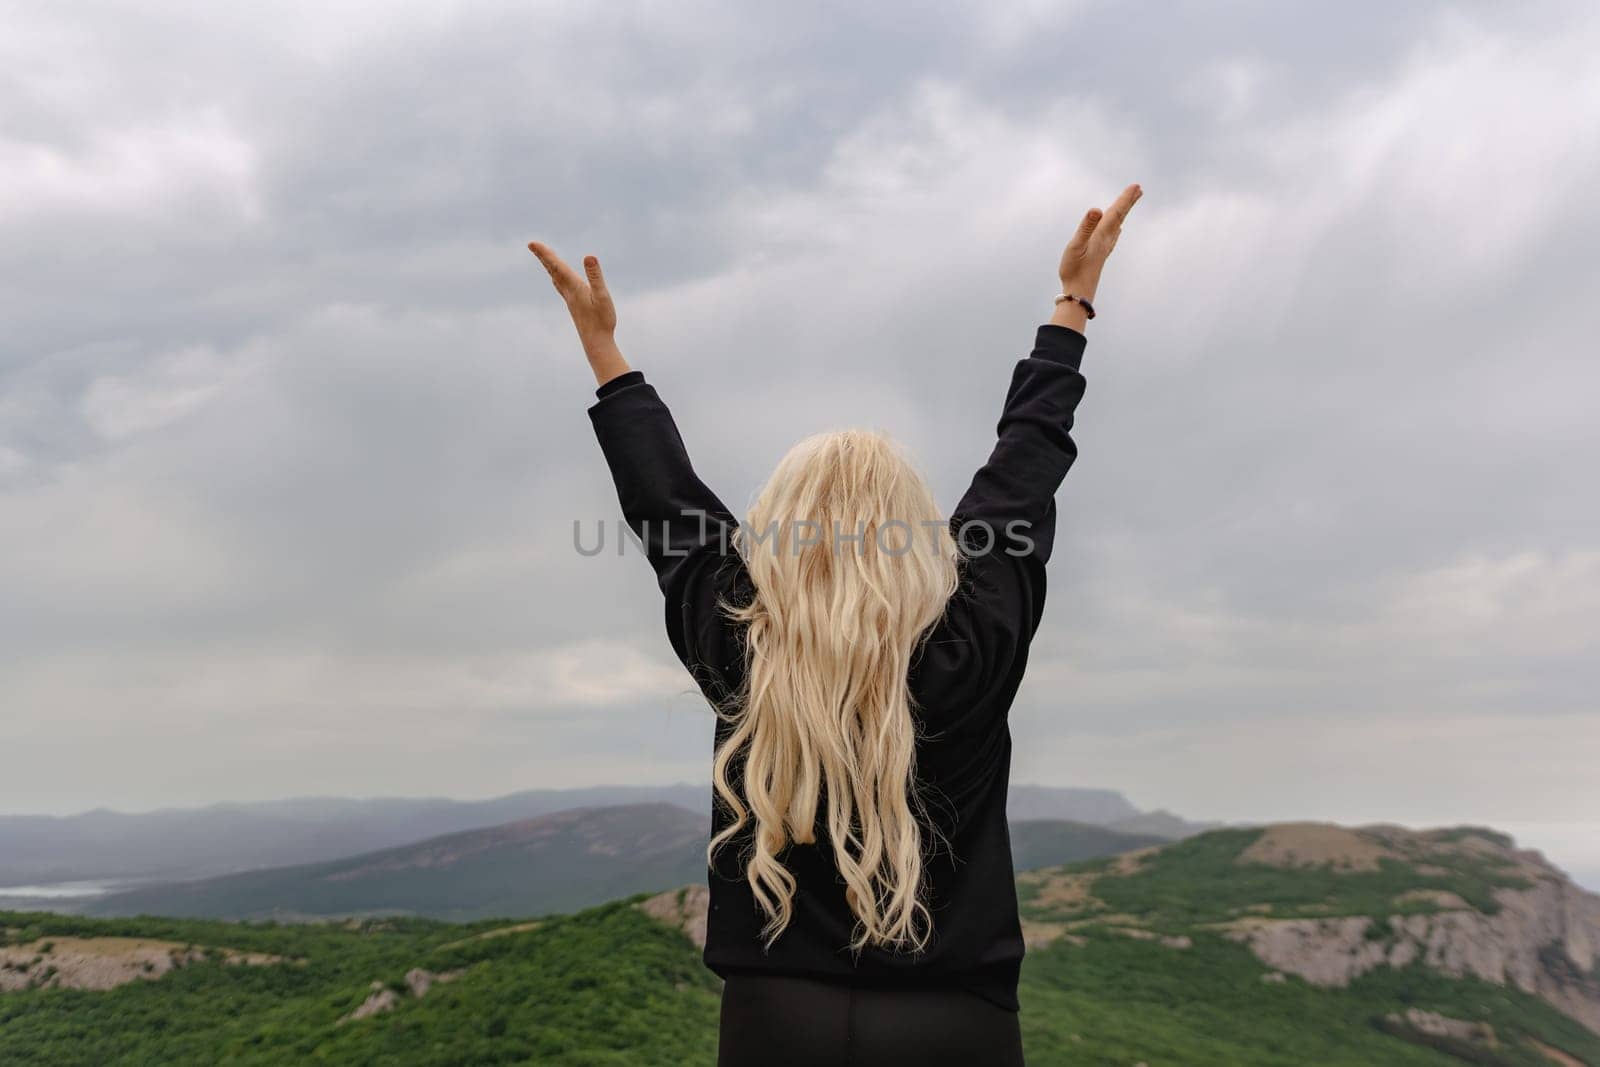 A woman with blonde hair is standing on a mountain and raising her hands in the air. The sky is cloudy, and the mountains are in the background. The woman is happy and joyful